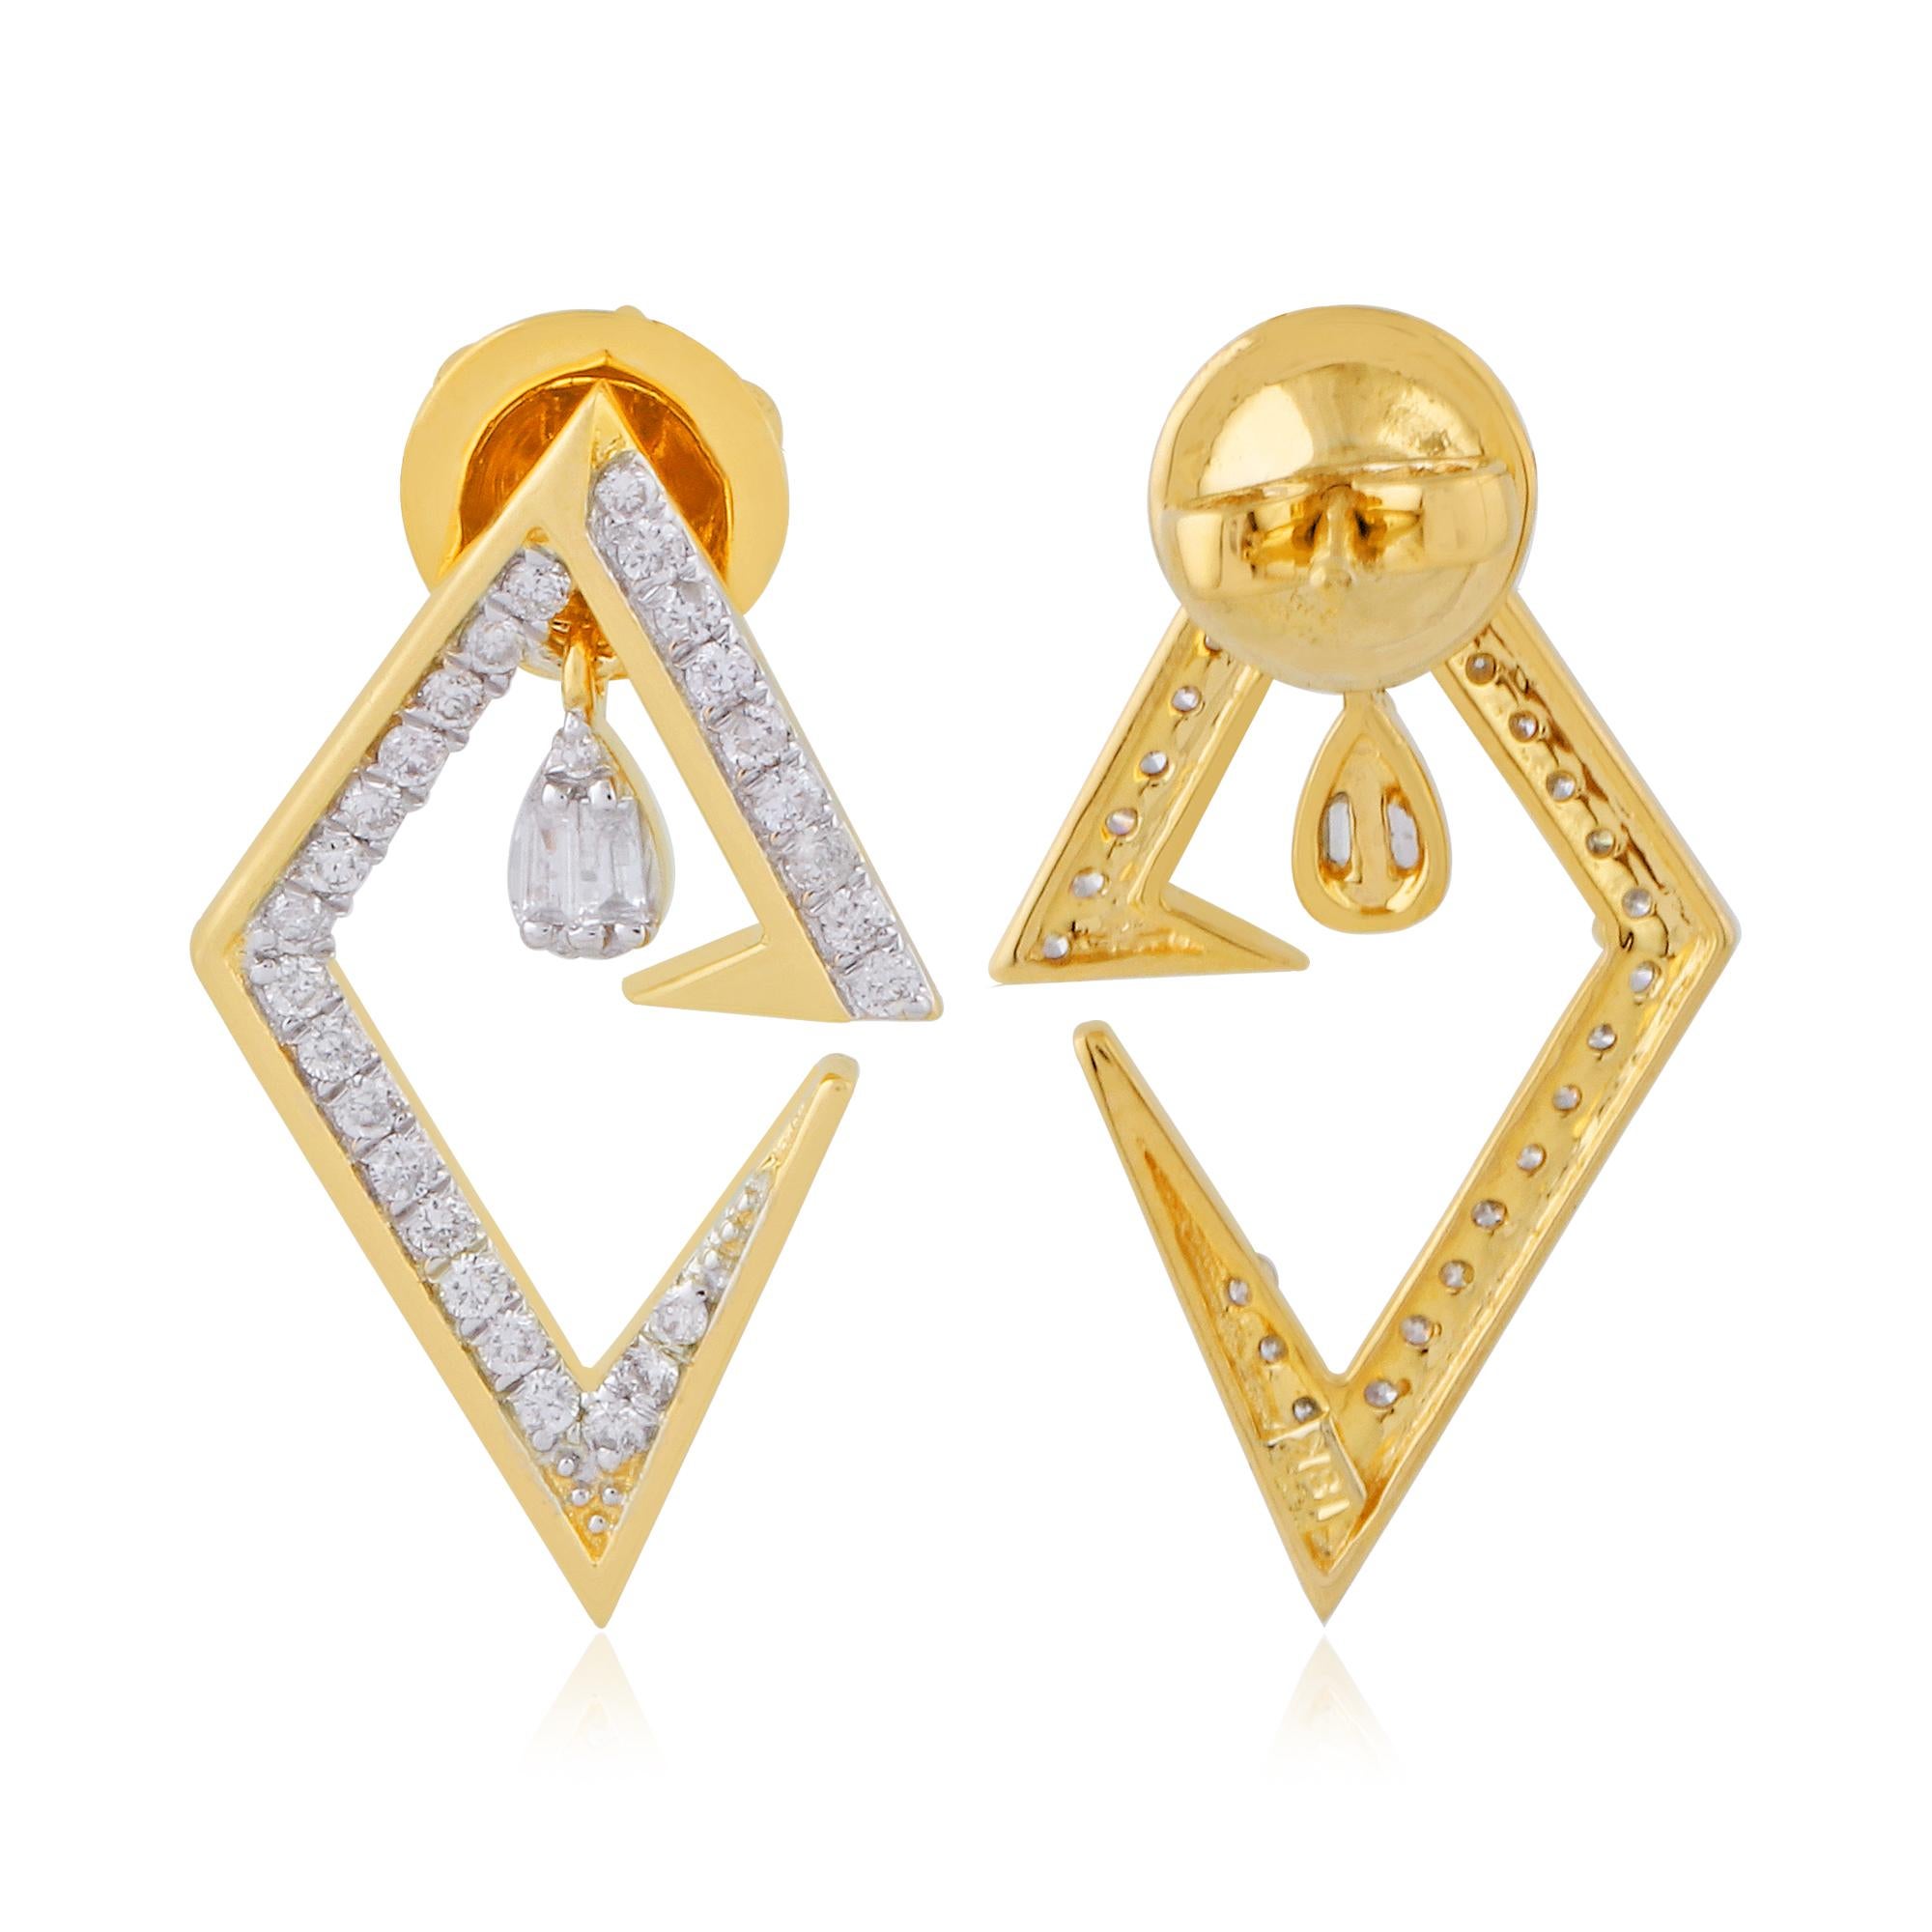 Item Code :- SEE-1012
Gross Wt. :- 4.49 gm
18k Yellow Gold Wt. :- 4.37 gm
Diamond Wt. :- 0.60 Ct. ( AVERAGE DIAMOND CLARITY SI1-SI2 & COLOR H-I )
Earrings Size :- 25 x 14 mm approx.

✦ Sizing
.....................
We can adjust most items to fit